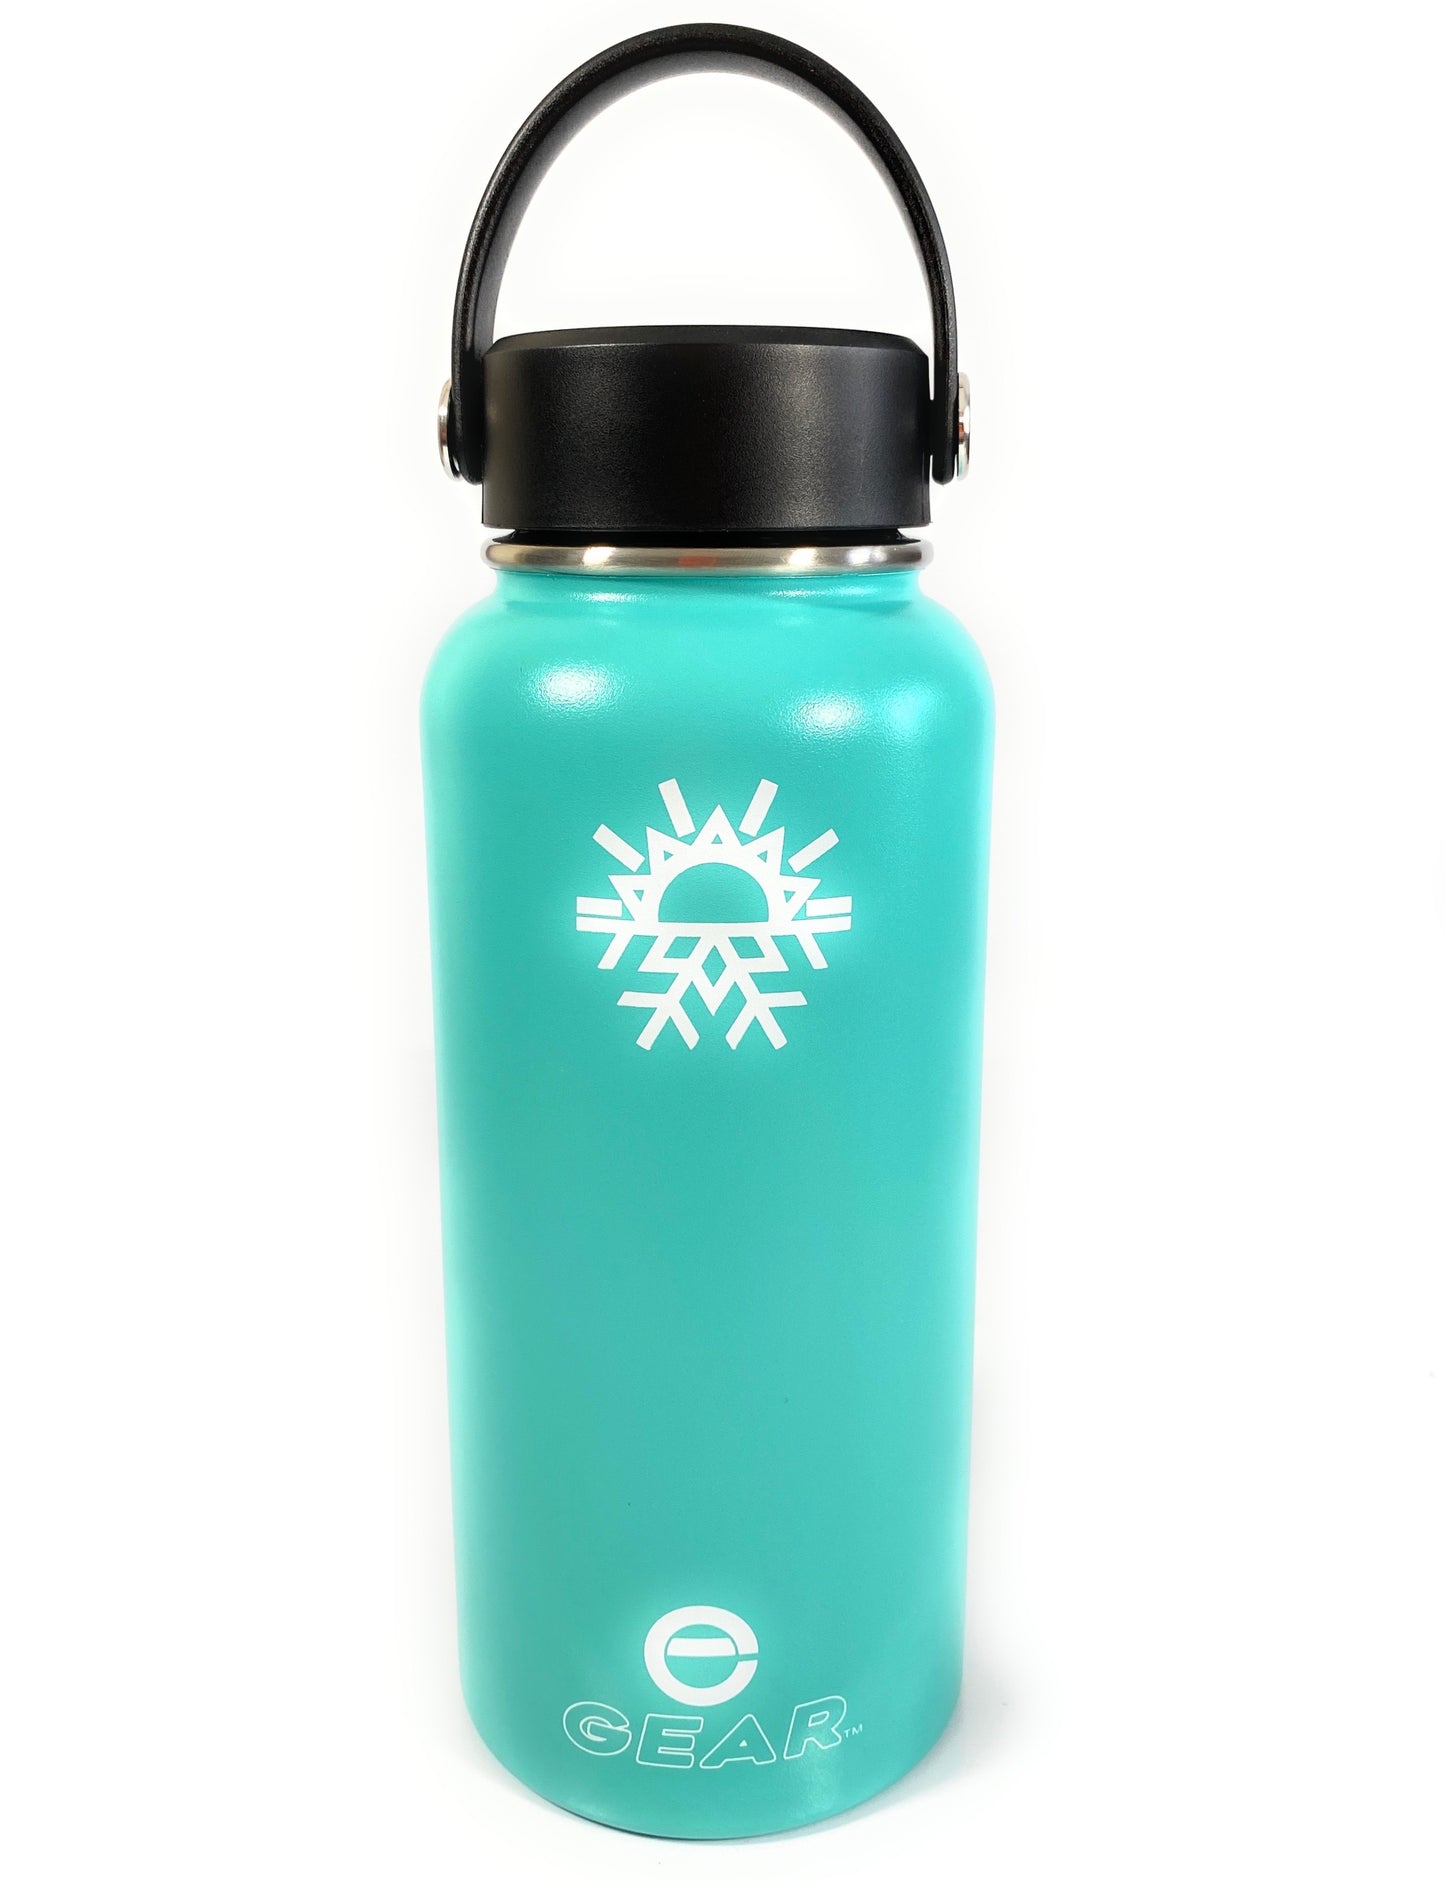 Enthusiast Gear 32 oz Wide Mouth Water Bottle - Stainless Steel, Vacuum Insulated, Reusable Water Bottle with Flex Handle